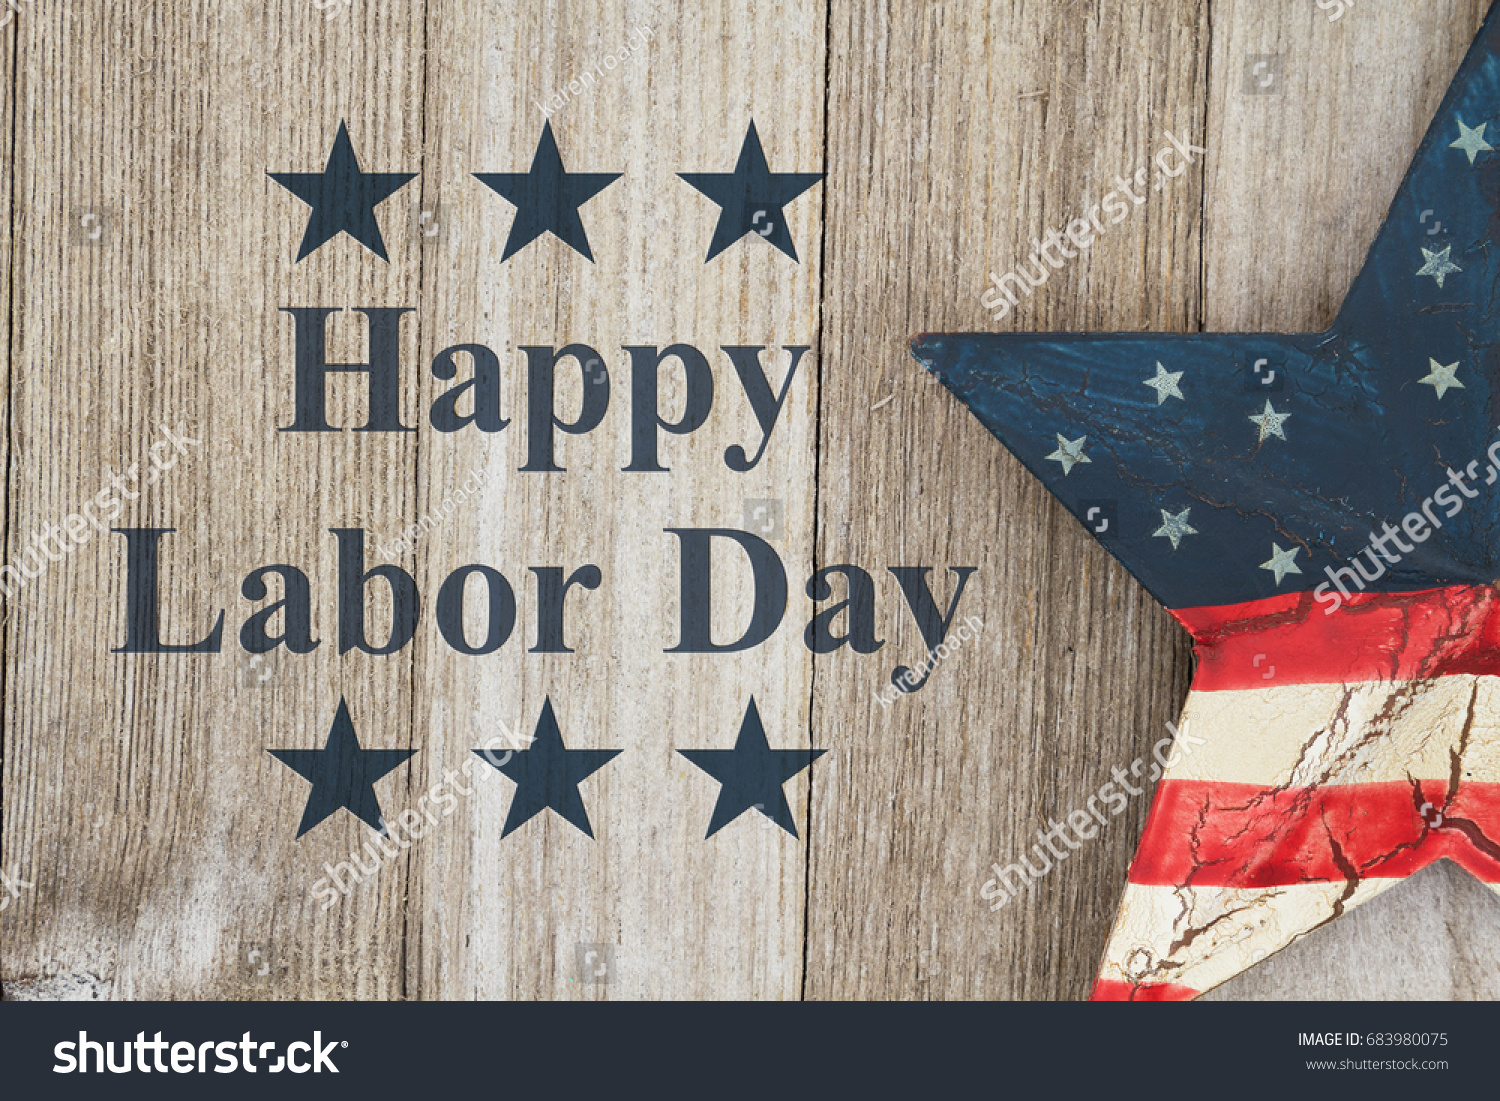 Happy Labor Day Greeting, USA patriotic old star on a weathered wood background with text Happy Labor Day #683980075